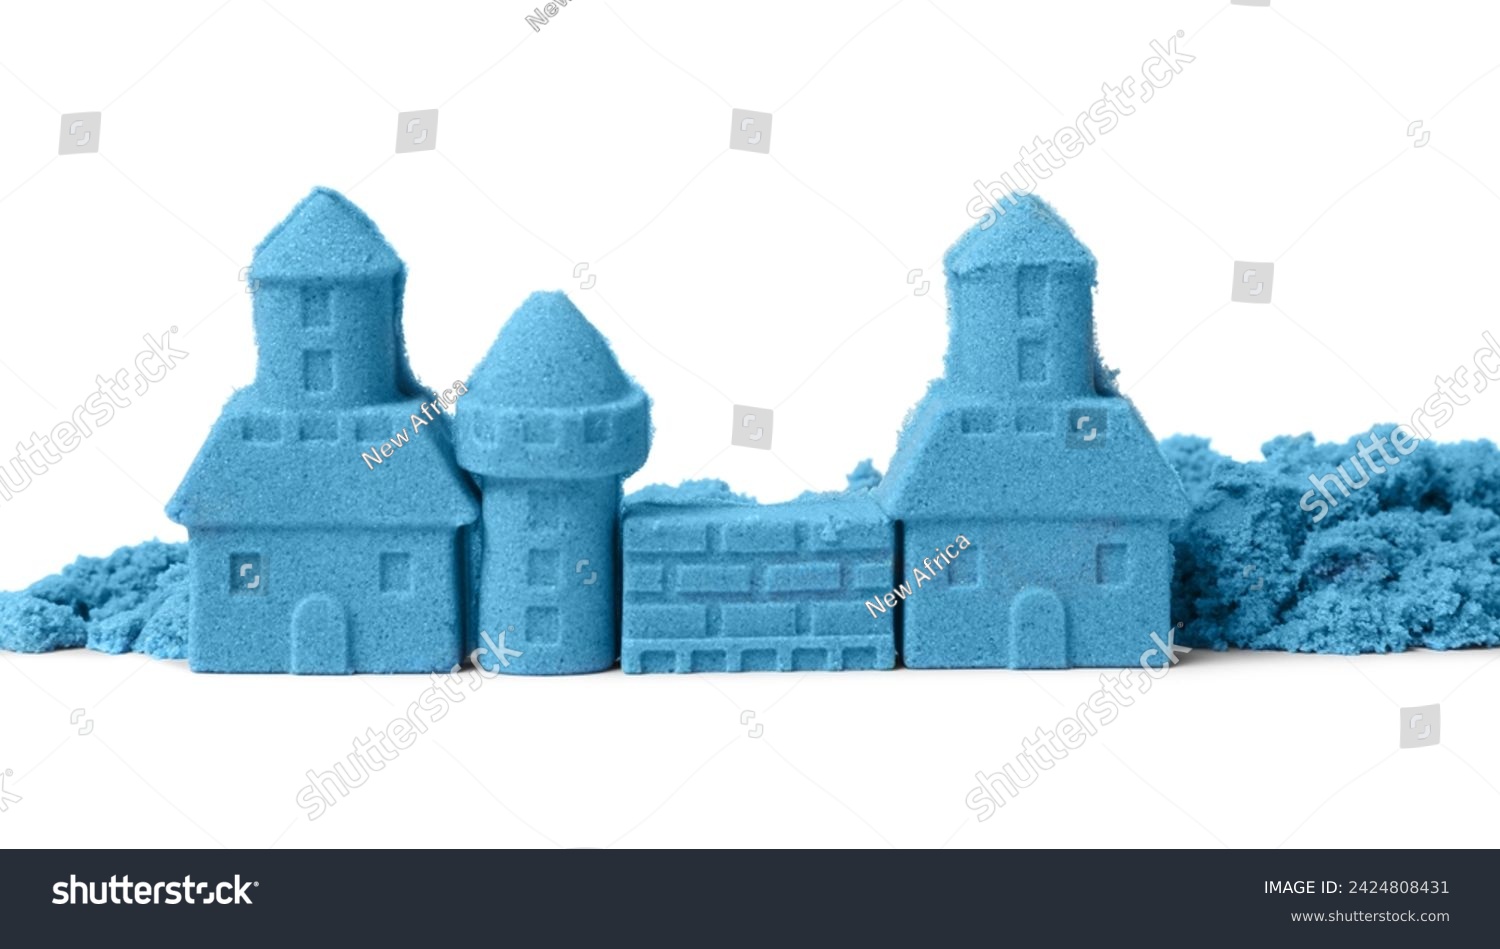 Castle made of blue kinetic sand isolated on white #2424808431